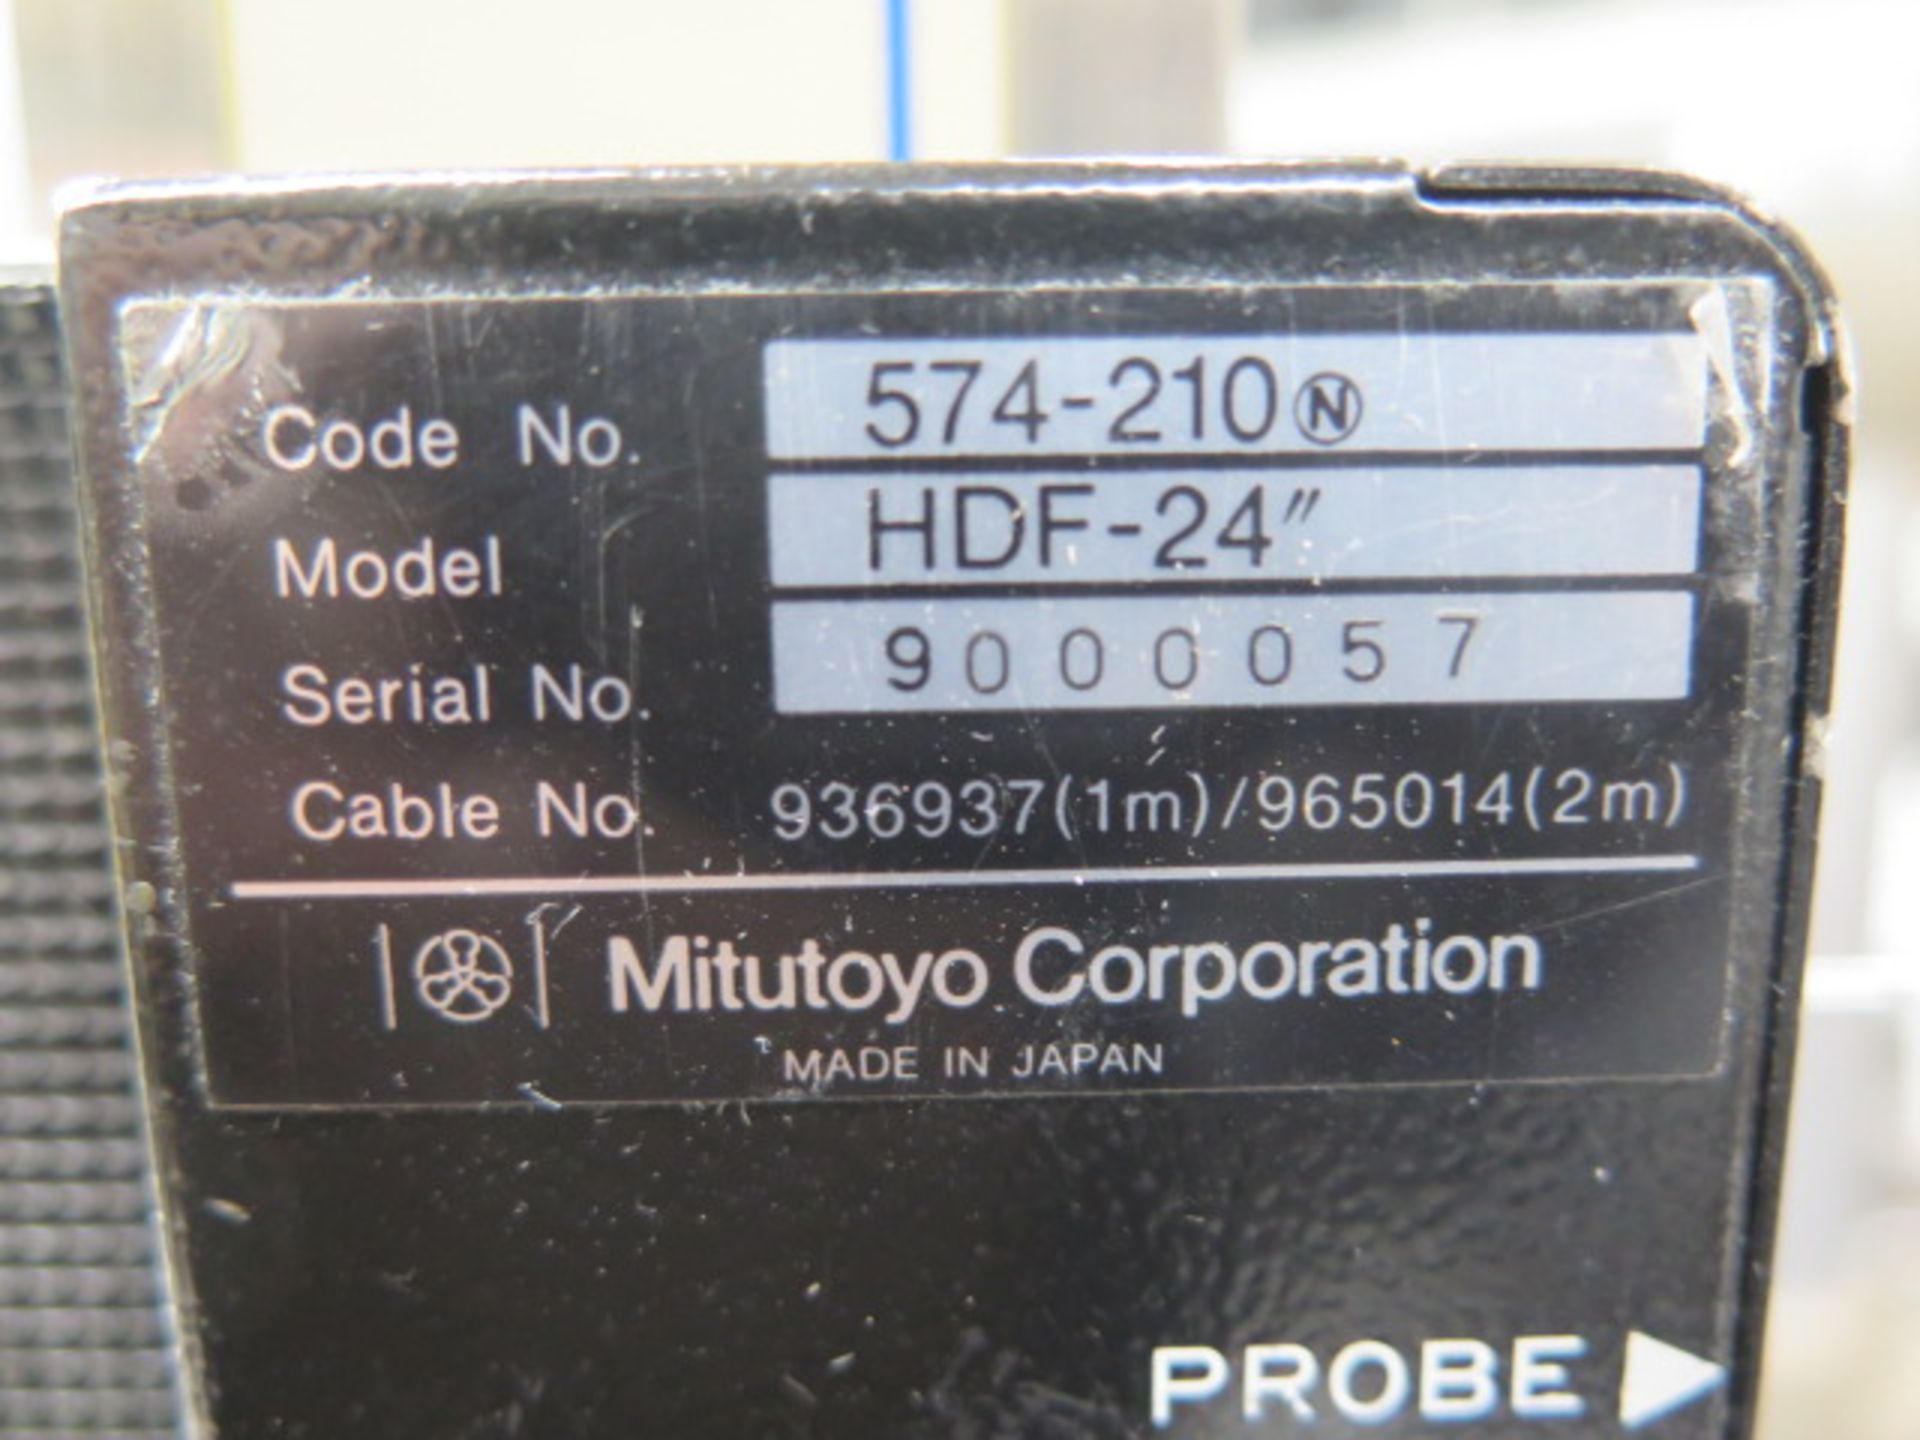 Mitutoyo “Heightmatic 600” 24” Digital Height Gage (SOLD AS-IS - NO WARRANTY) - Image 8 of 8